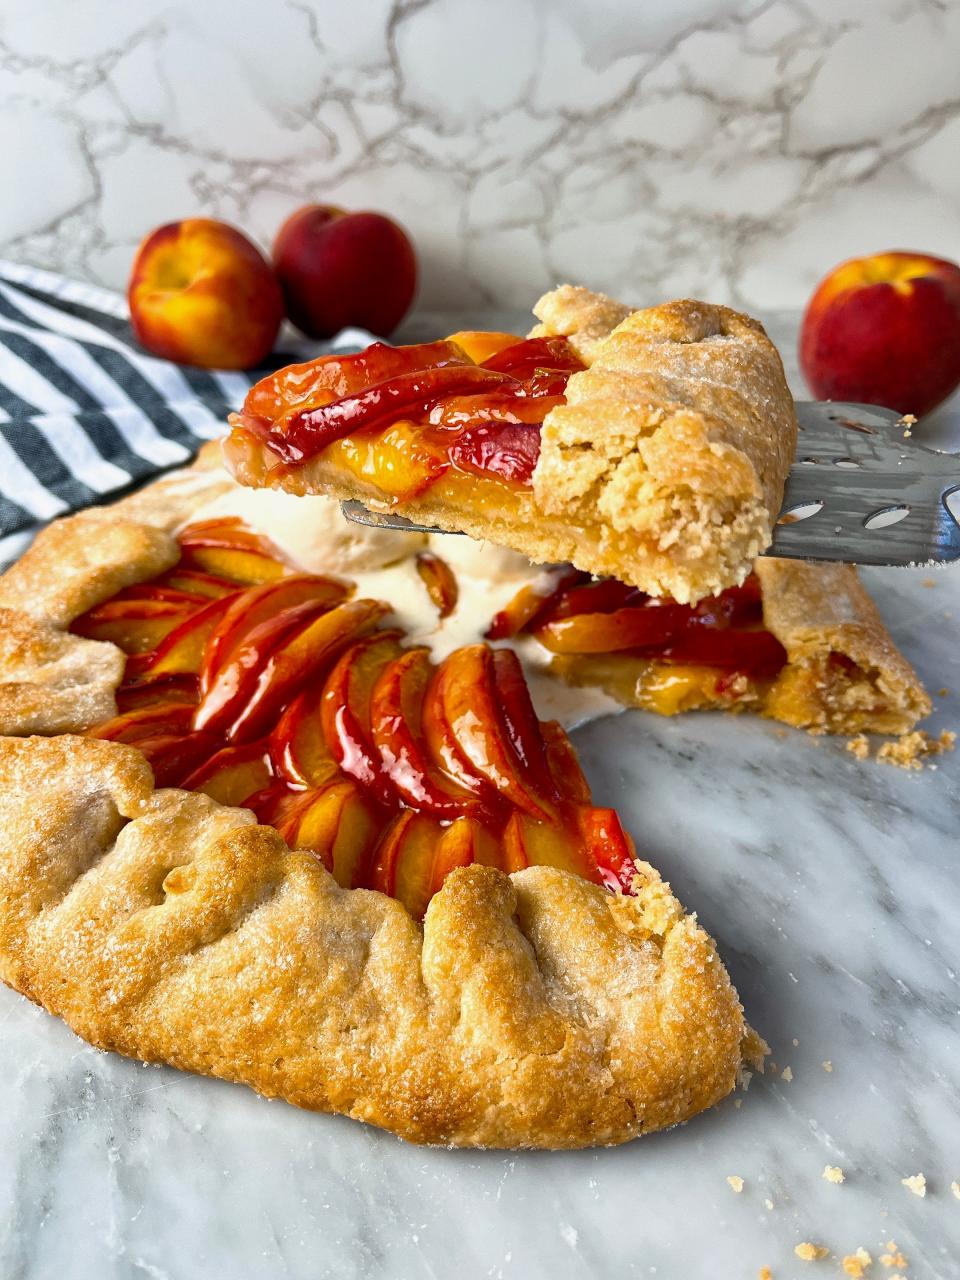 Peach galette is as easy to make as it is delicious to eat.